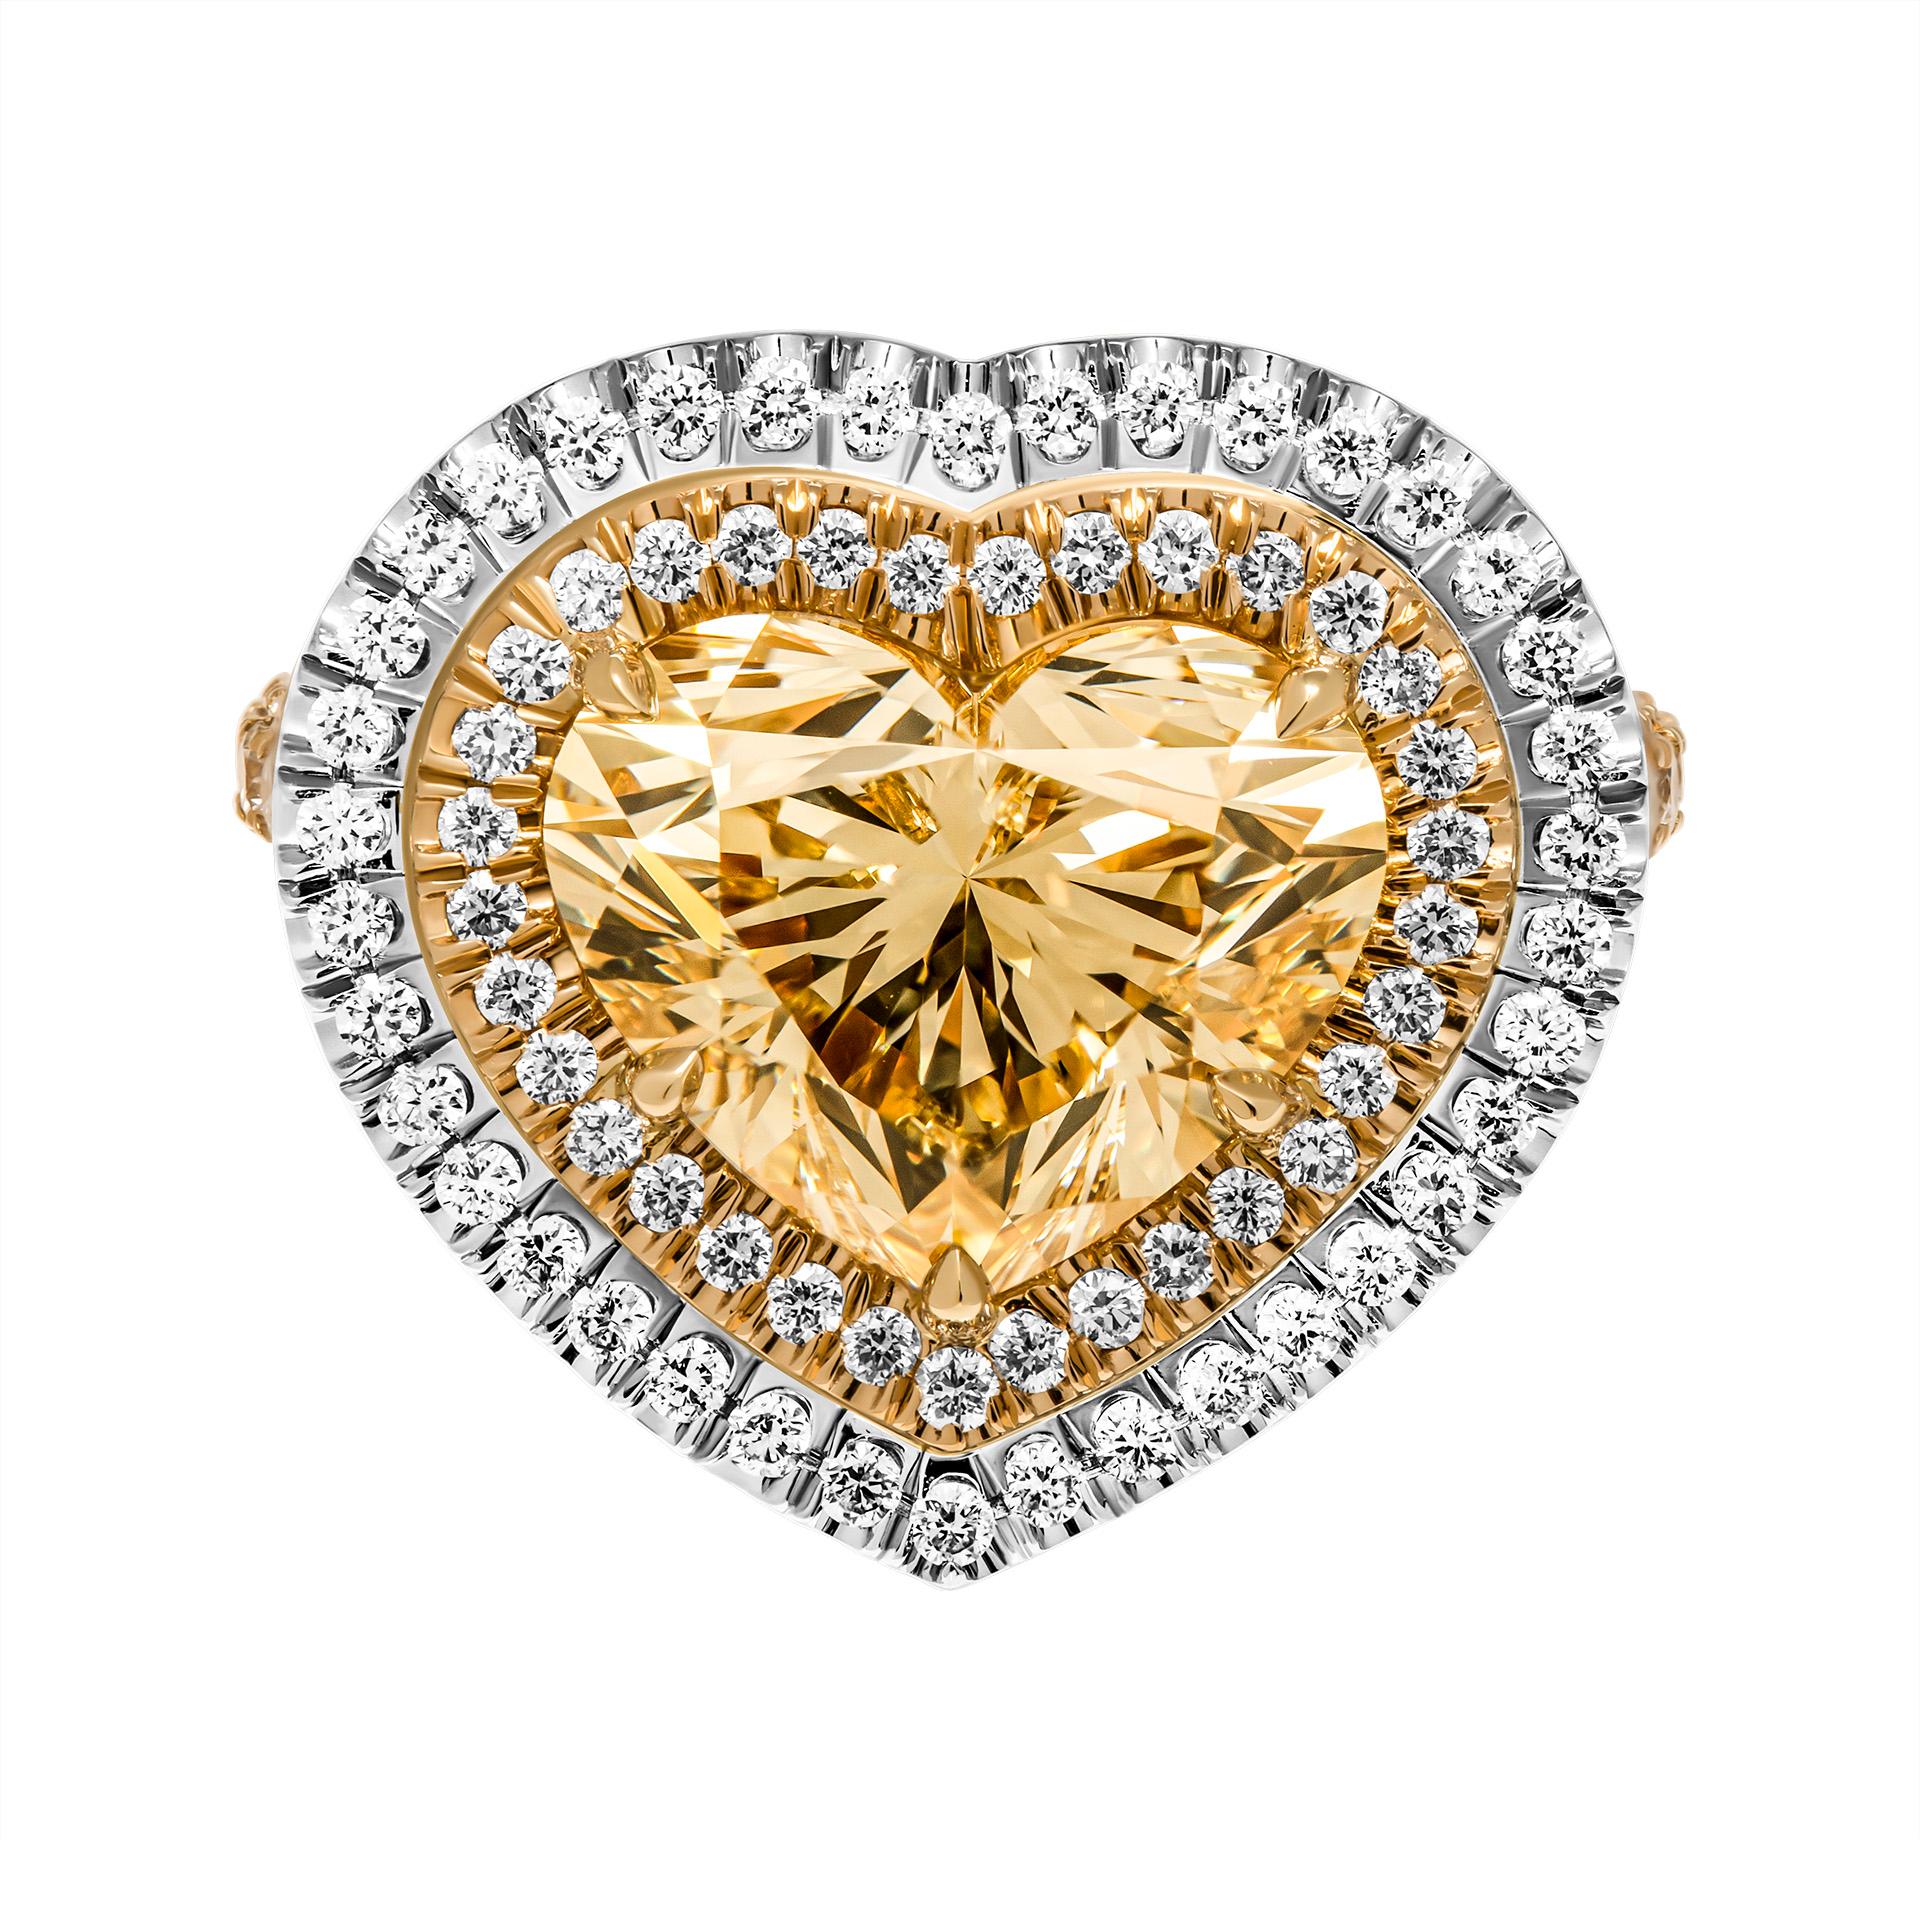 Engagement ring in 18K Yellow Gold & Platinum 
With white diamonds pave, double halo & split shank
Center stone: 5.02ct Natural Fancy Light Brownish Yellow VS1 Heart Shape Diamond GIA#6223048100 
Total Carat Weight of melee: 2.03ct 
Size: 6.25